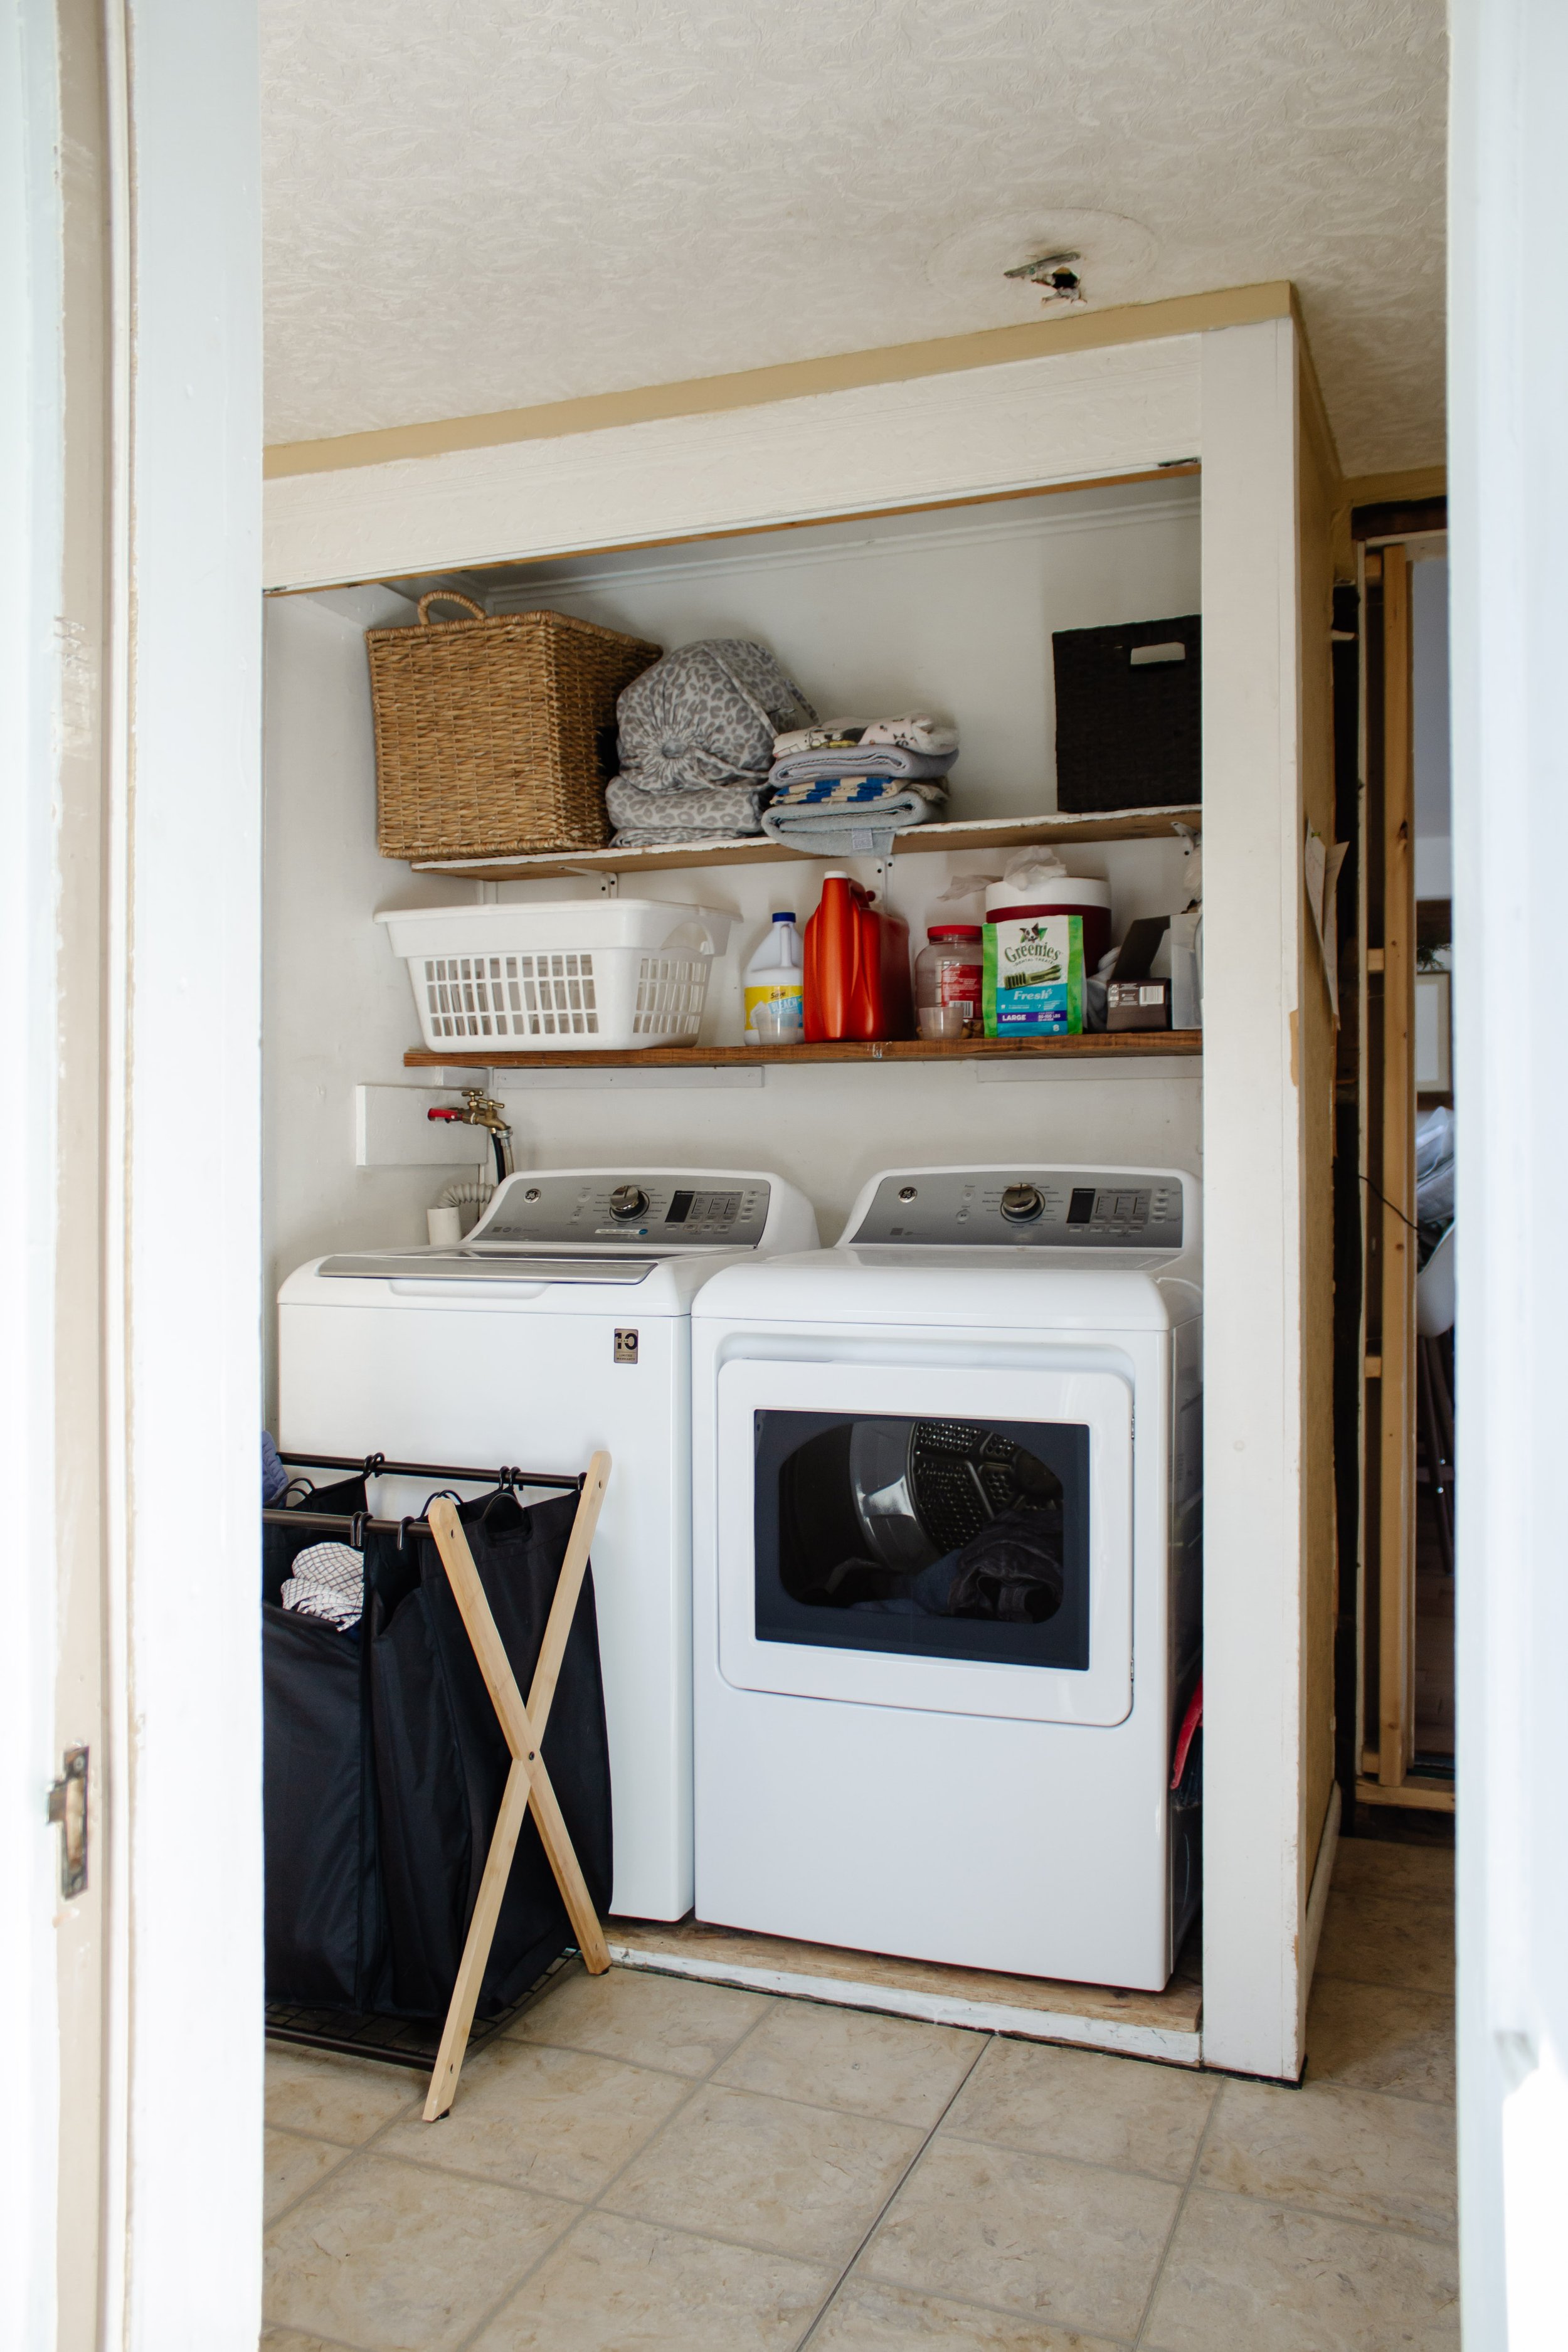 Laundry closet makeover by Nadine Stay | How to maximize storage space in a laundry closet. Stackable washer and dryer I love. Linen closet inspiration. Pull out hamper in closet. Rustic laundry room. Brown doors.